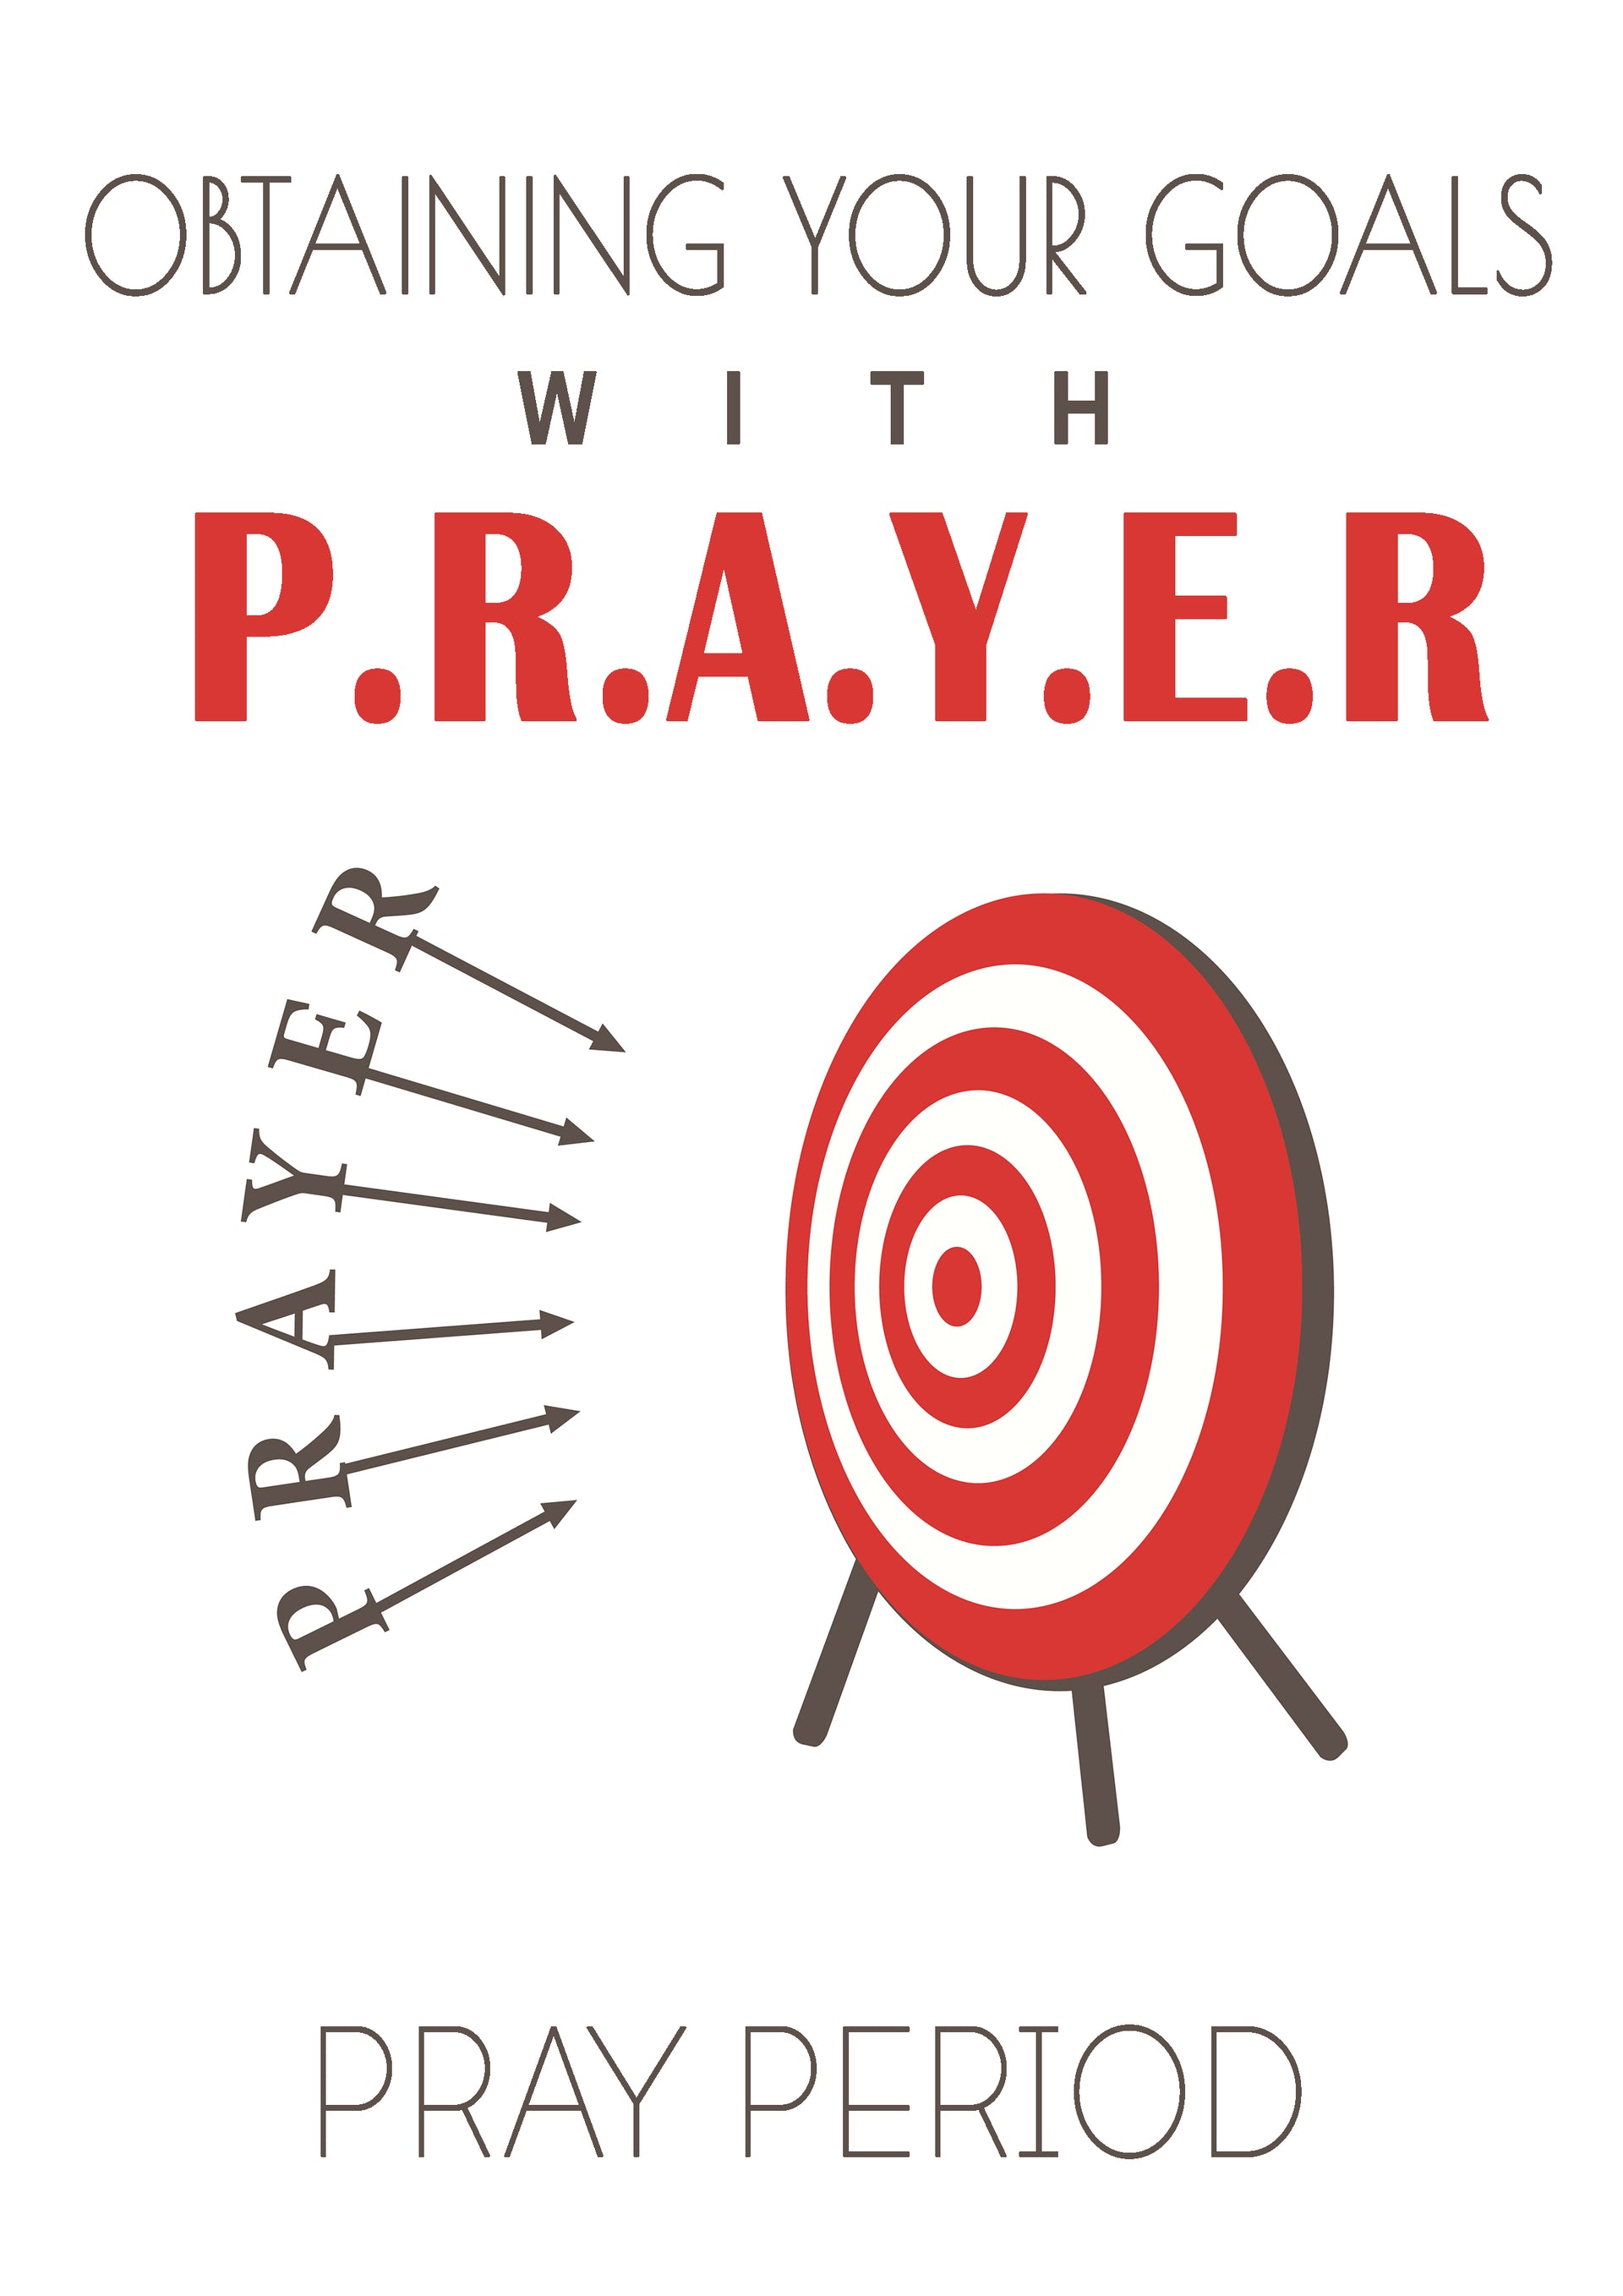 “OBTAINING YOUR GOALS WITH P.R.A.Y.E.R.” - FREE GUIDE - Pray Period